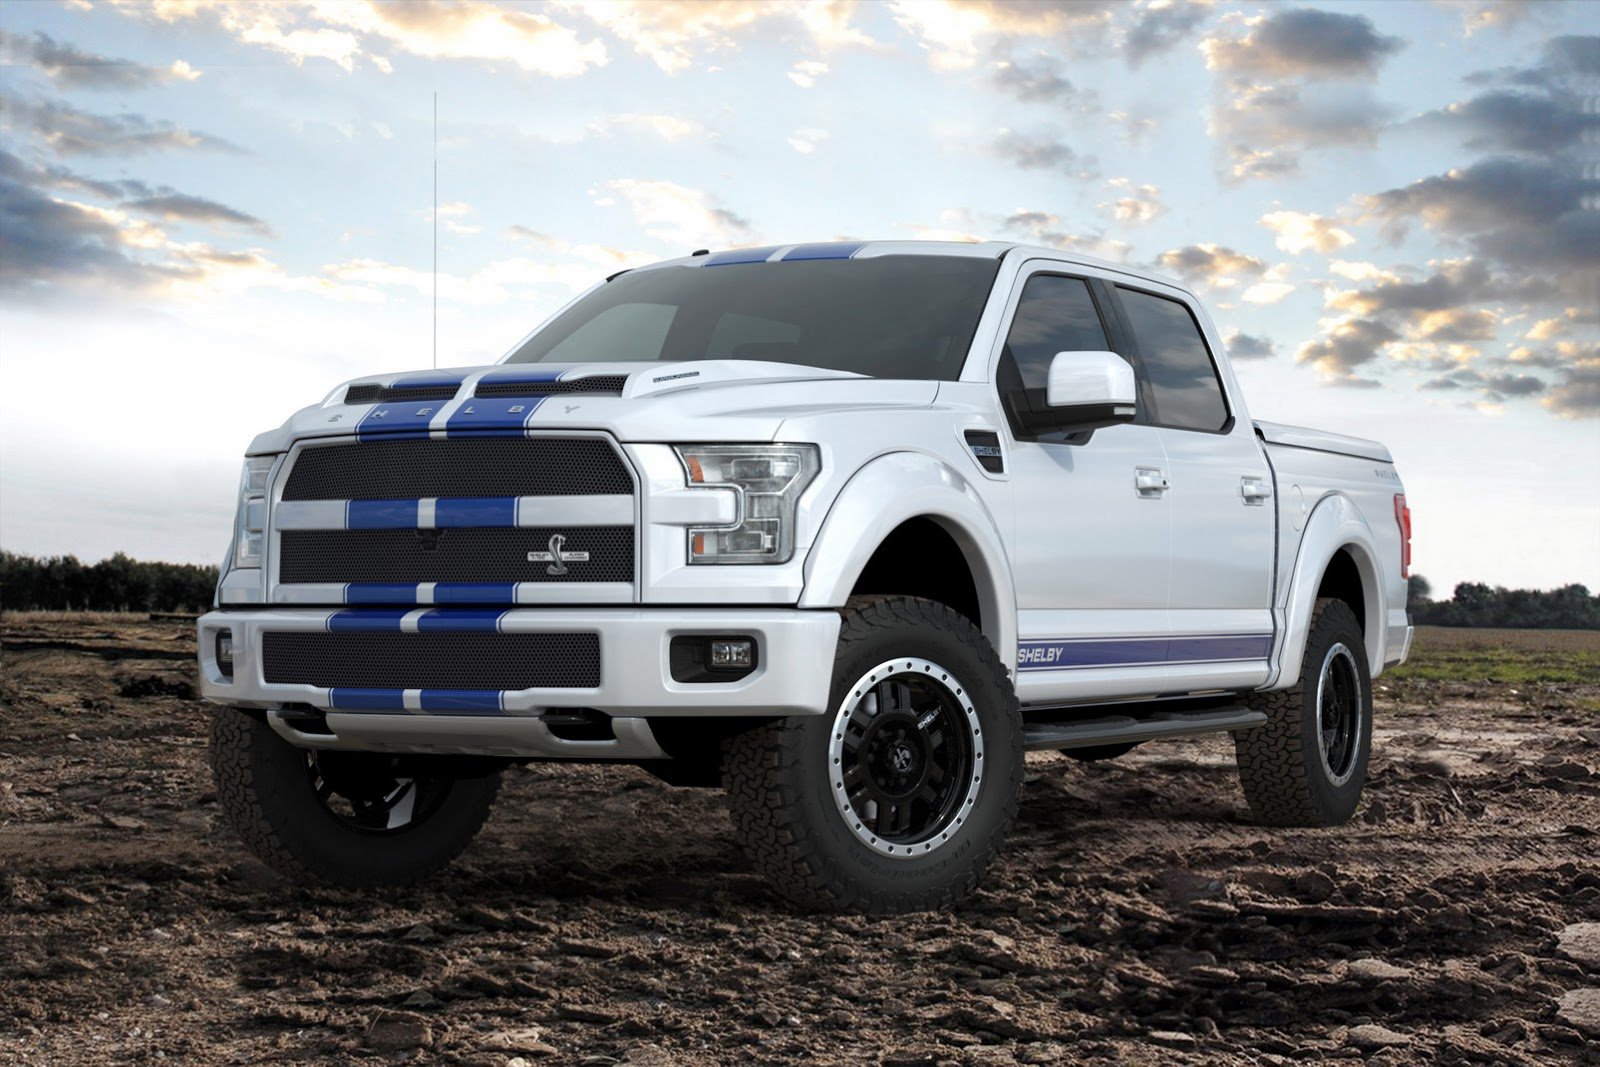 Ford Shelby Raptor Backgrounds, Compatible - PC, Mobile, Gadgets| 1600x1067 px